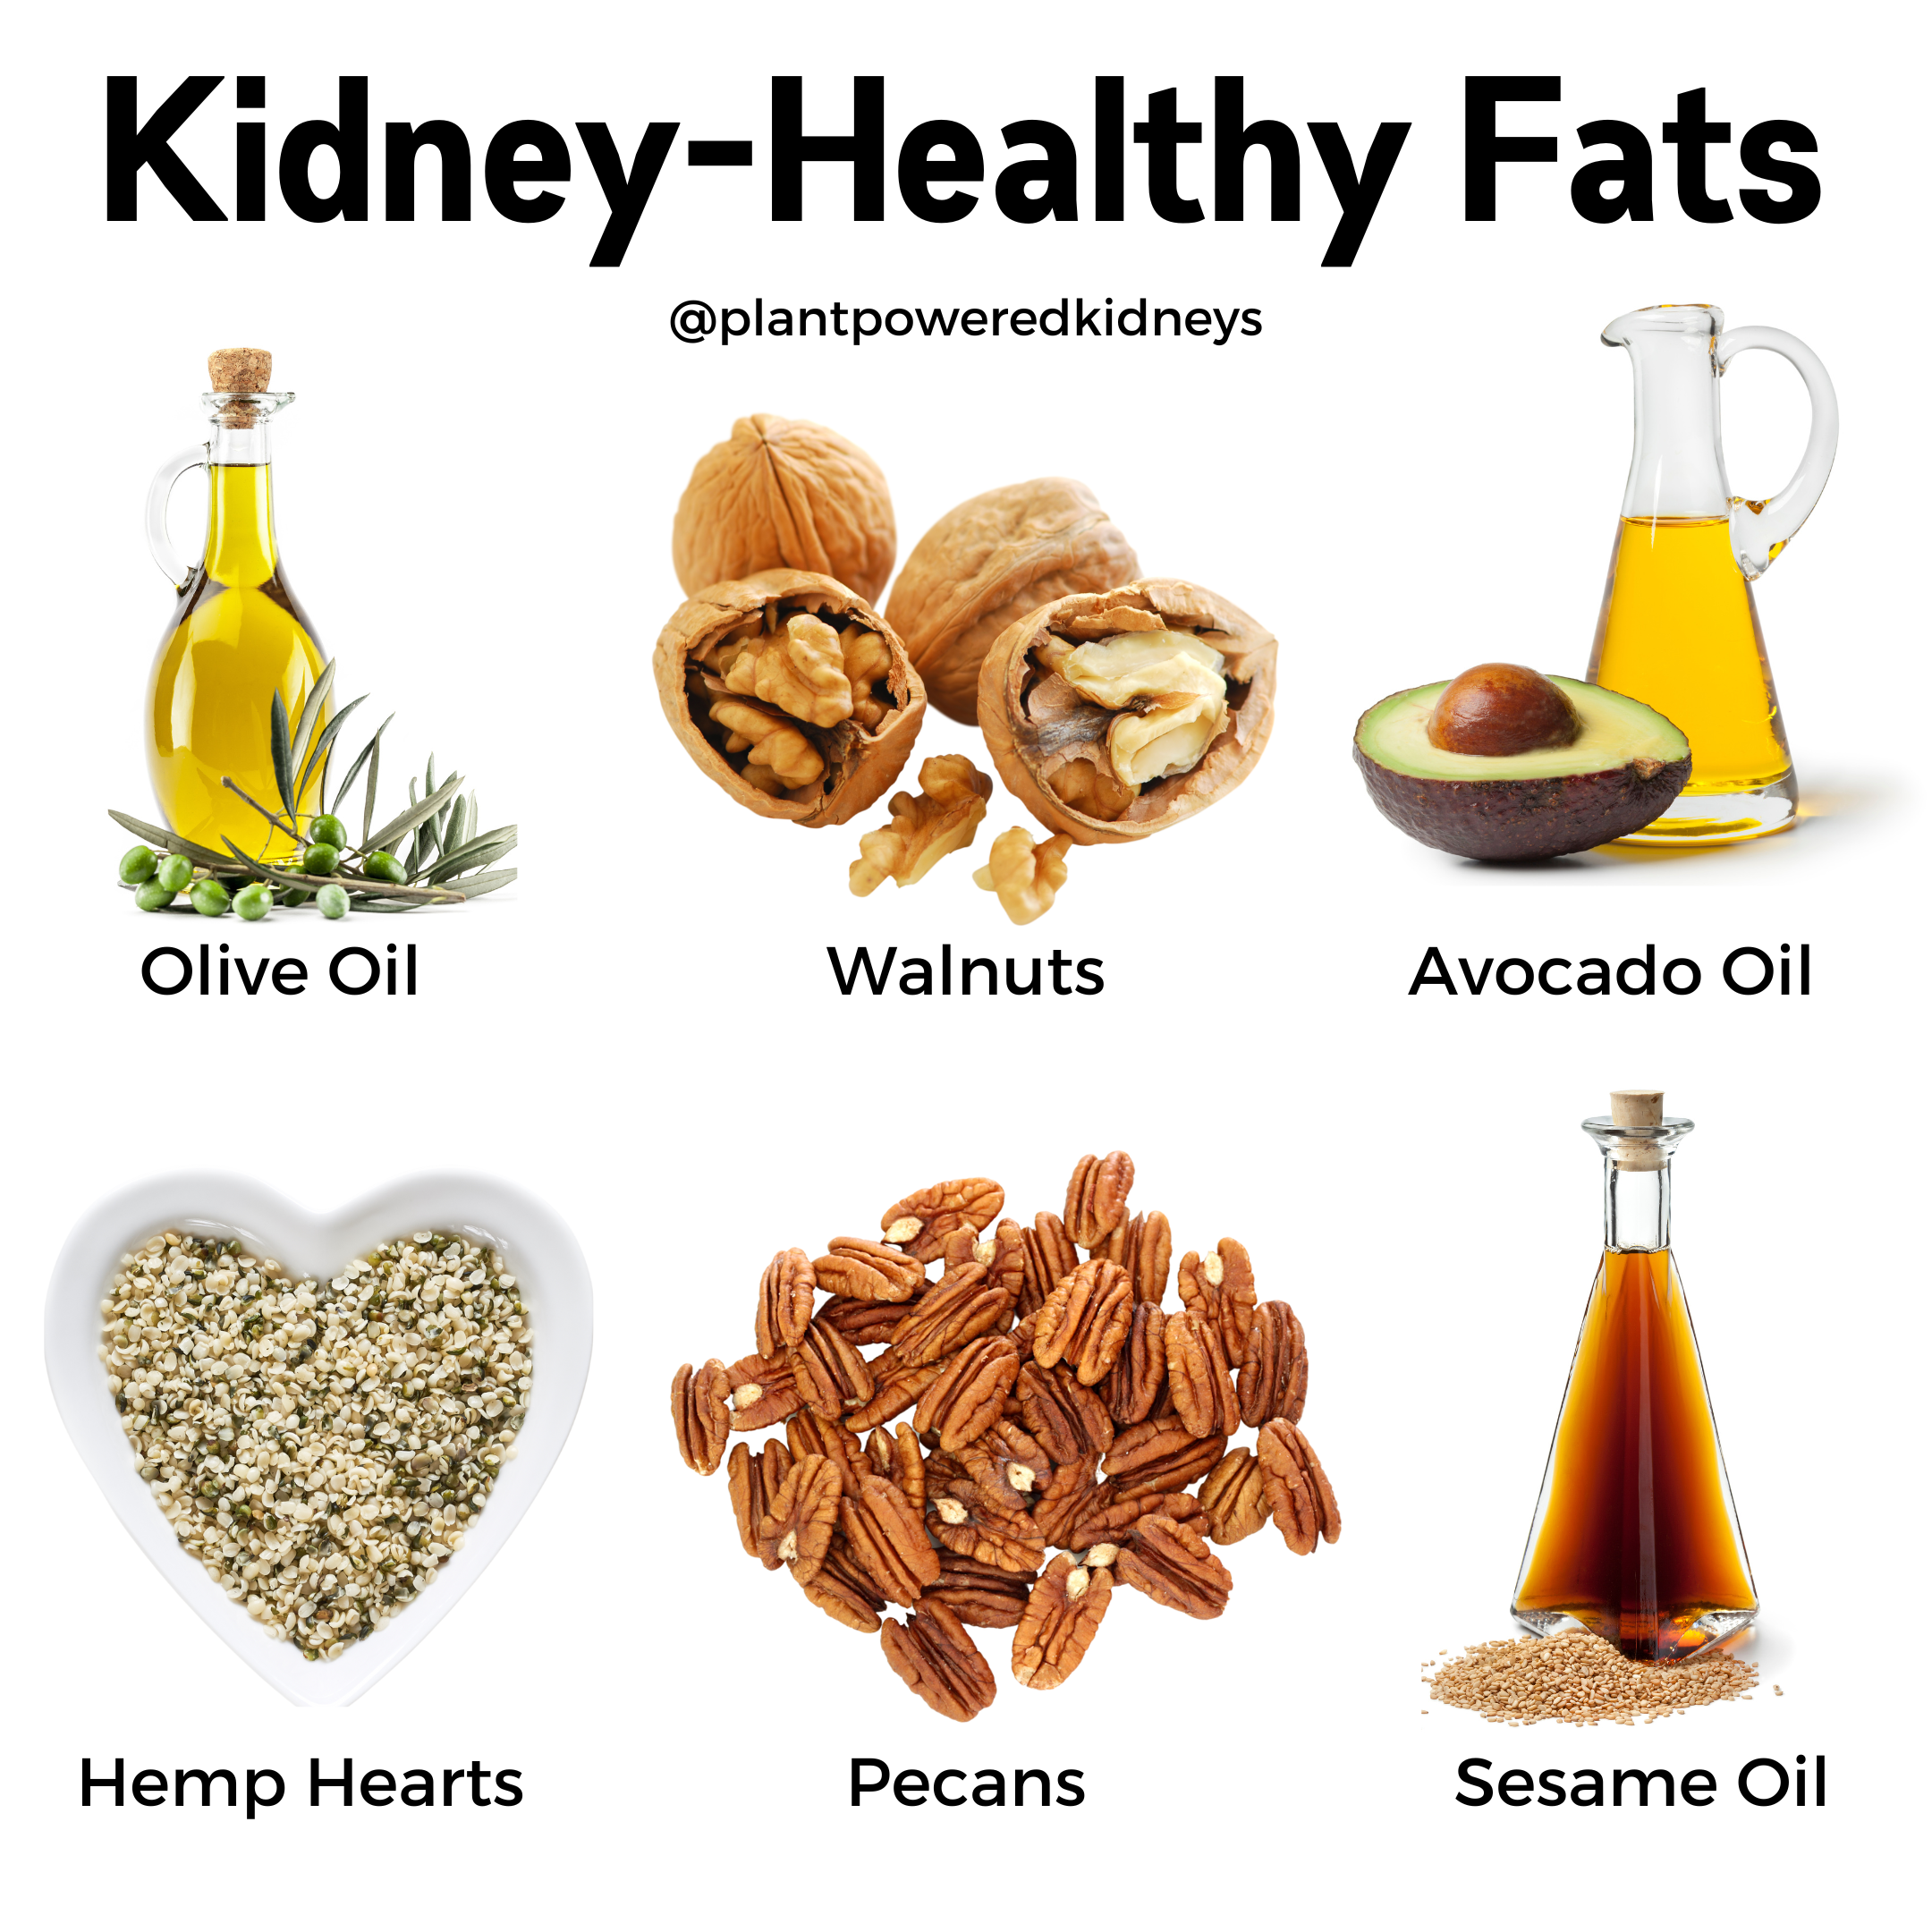 Examples of kidney-healthy fats include olive oil, walnuts, avocado oil, hemp hearts, pecans, and sesame oil.